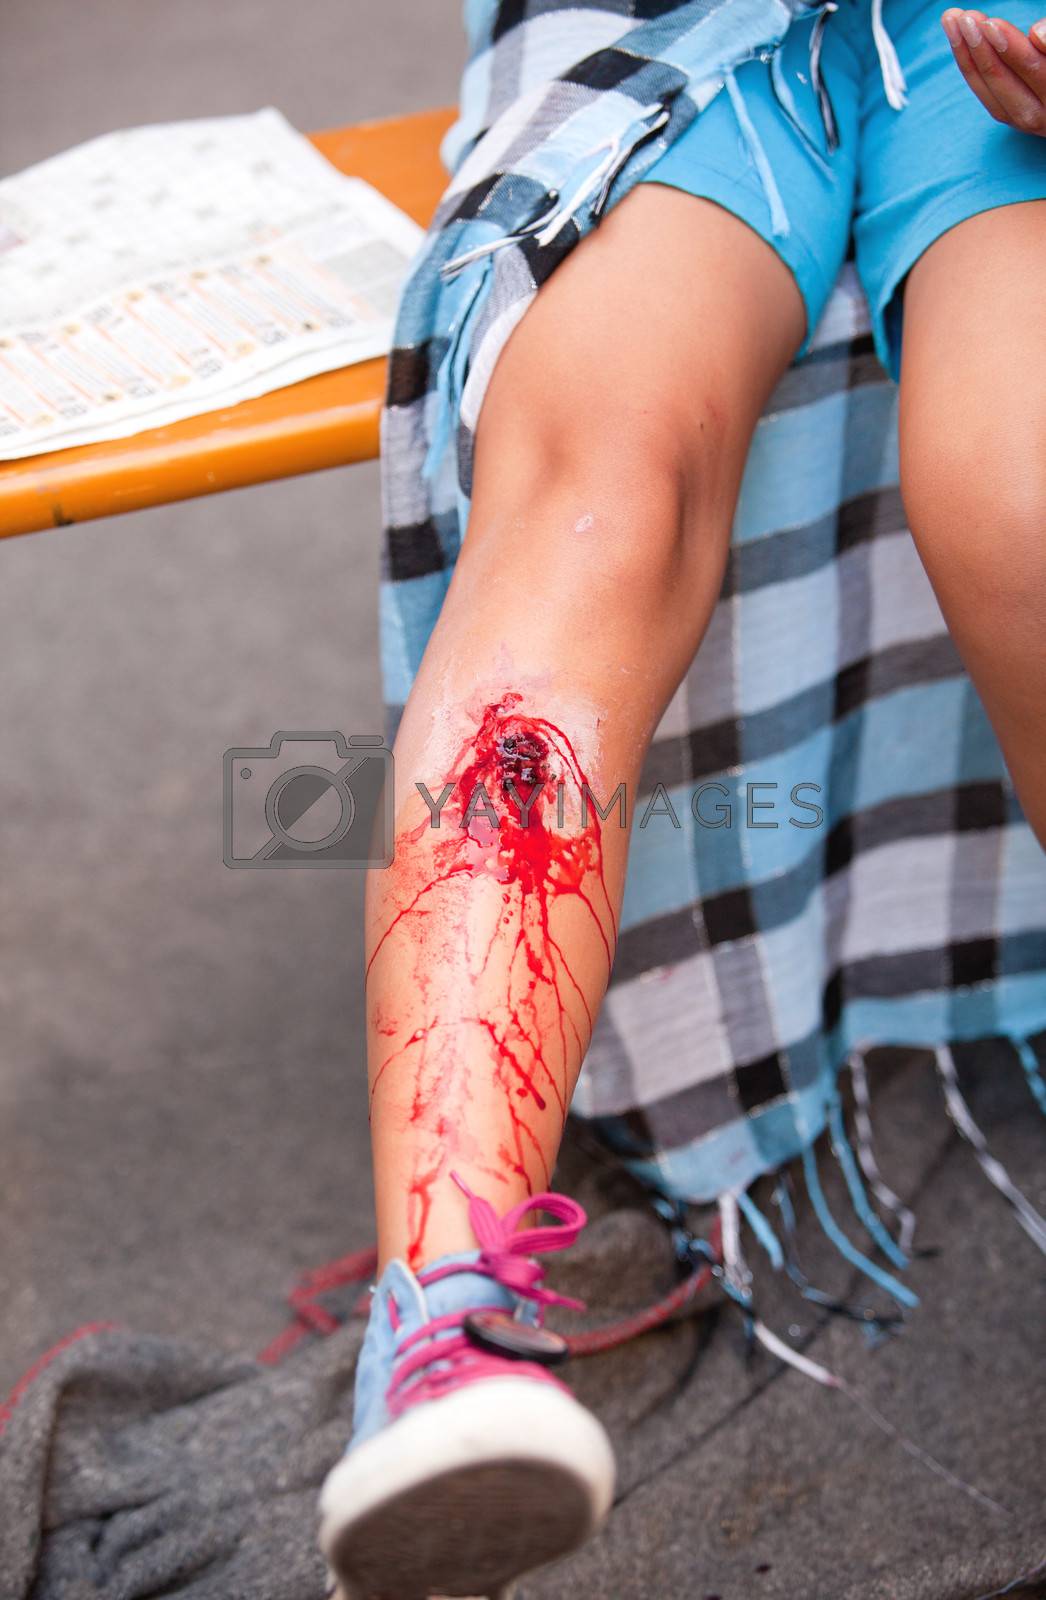 Royalty free image of Leg injury by wellphoto